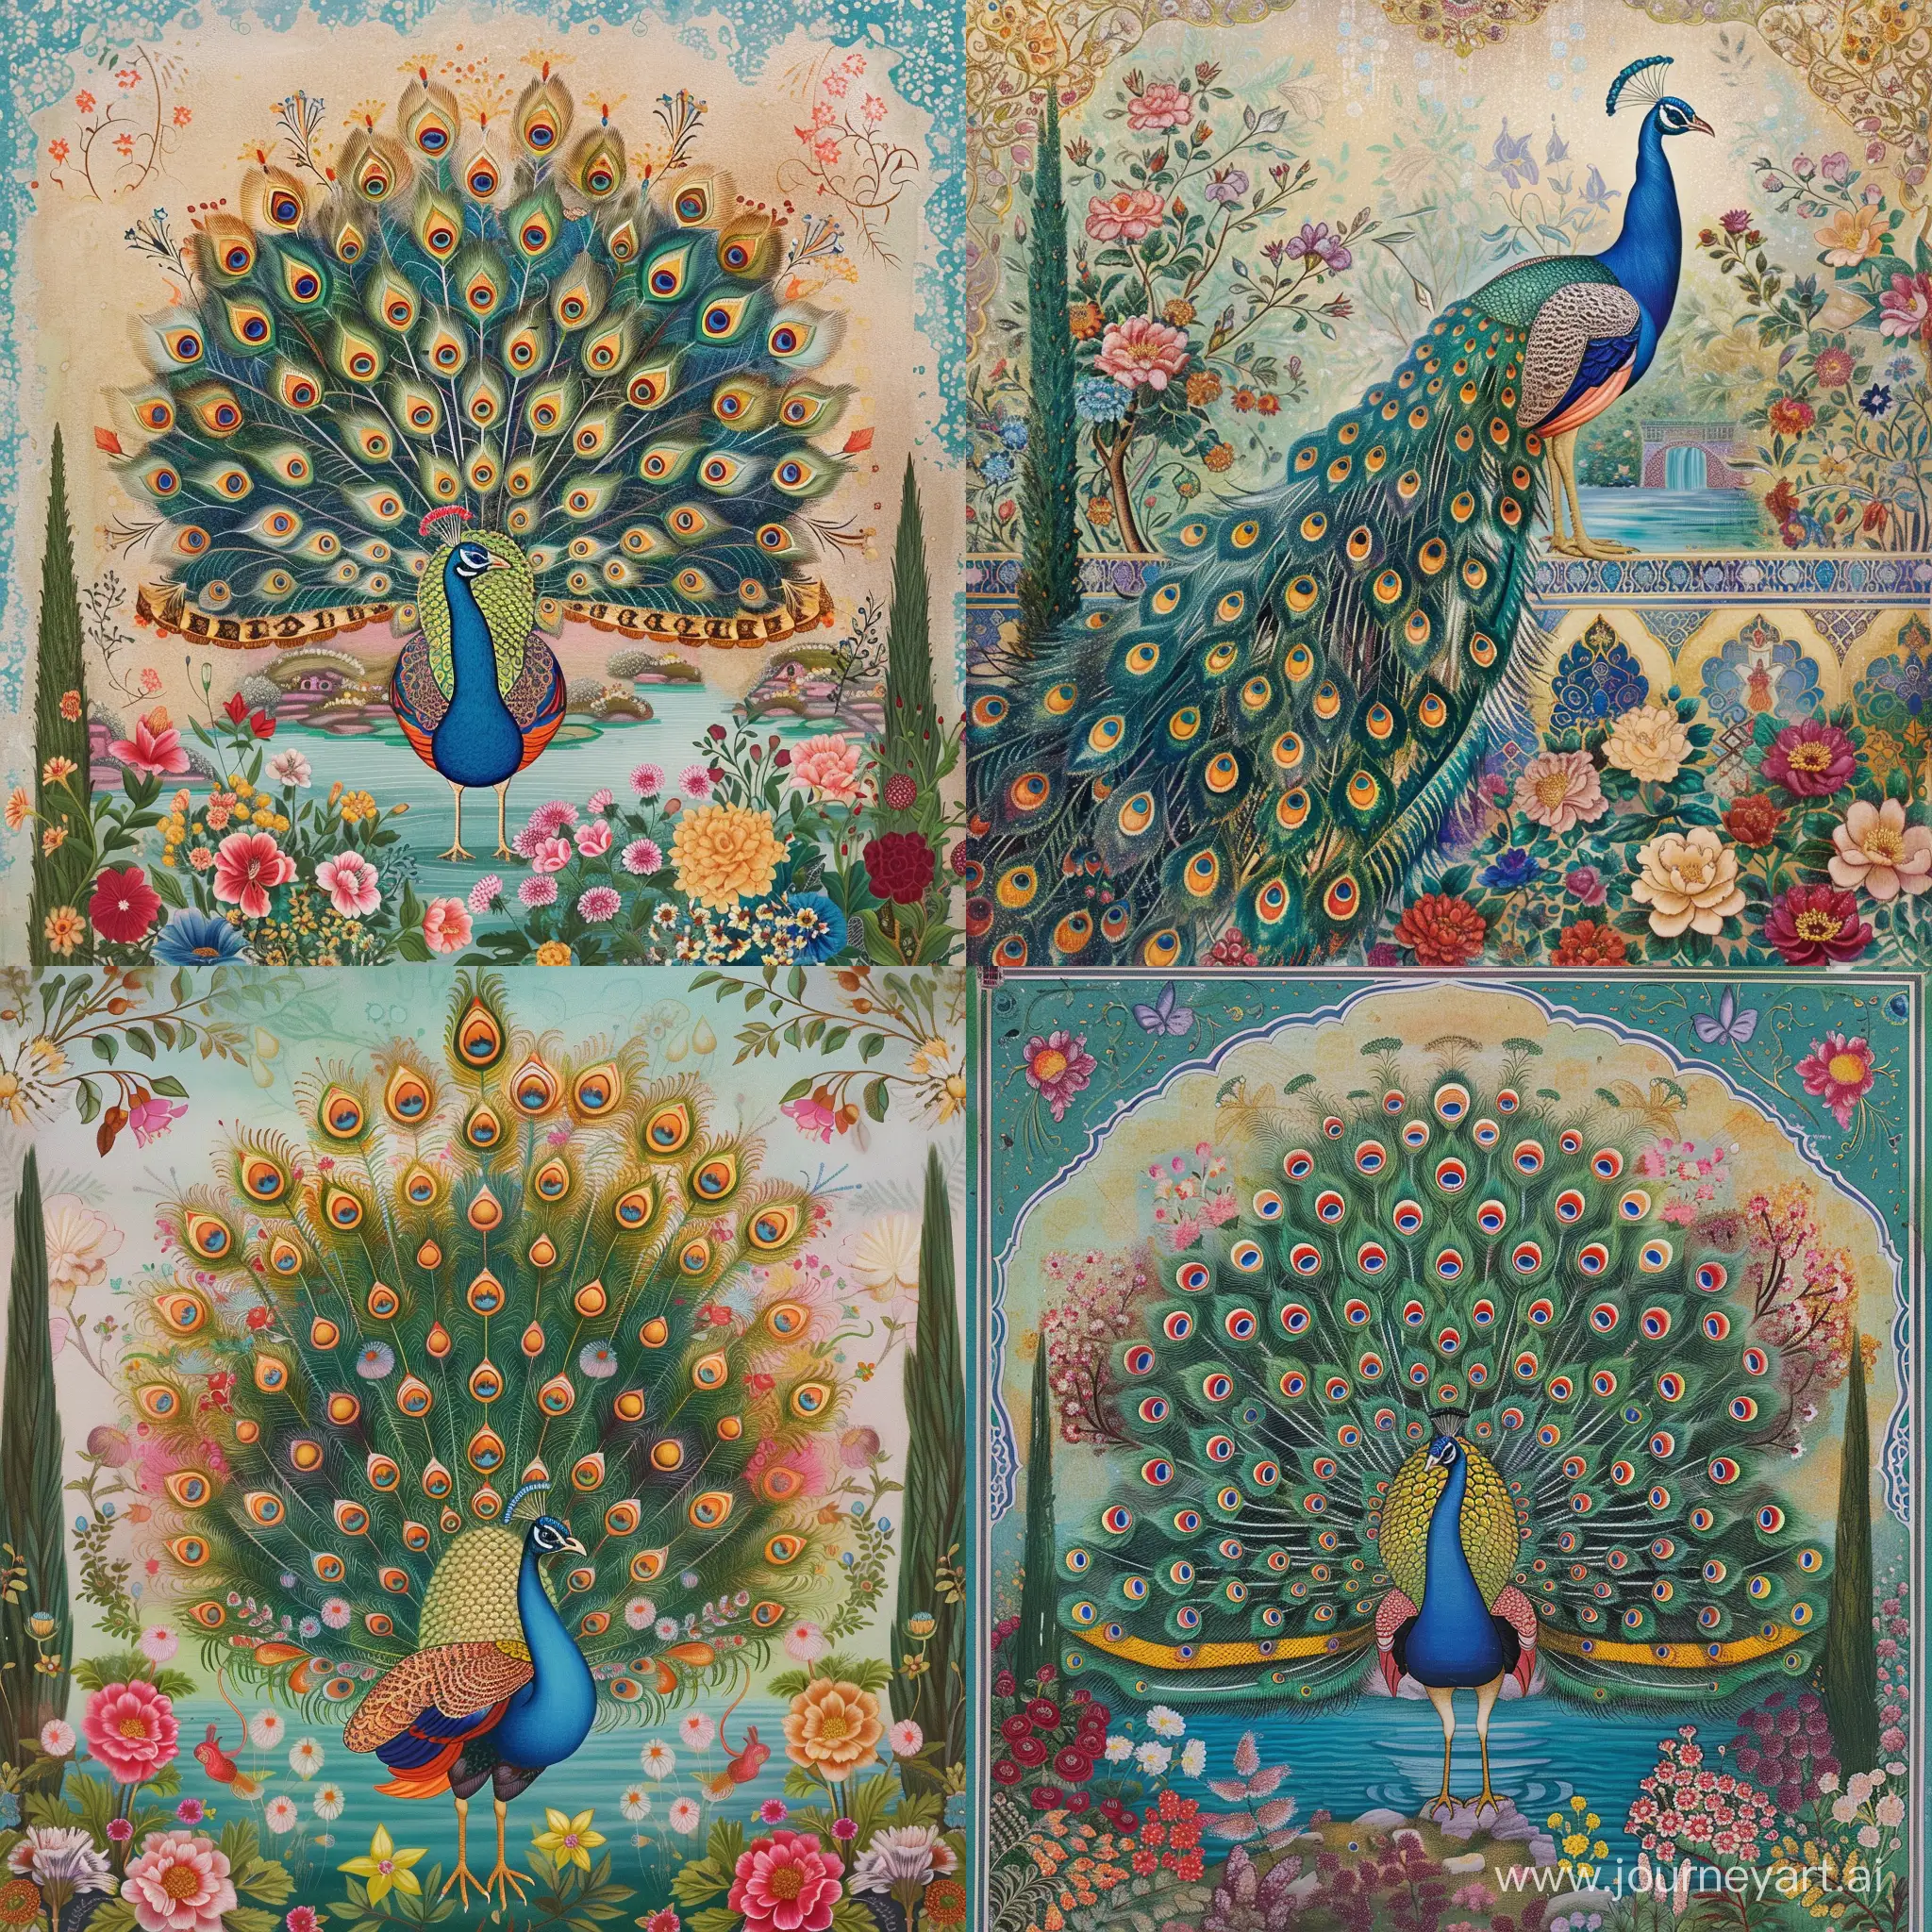 a Persian miniature depicting a tranquil garden scene with a central focus on a majestic peacock, adorned with vibrant feathers, standing gracefully amidst blooming flowers and lush greenery. The peacock should be depicted in a regal manner, with intricate patterns and elegant details on its feathers, and surrounded by elements that evoke a sense of serenity and beauty such as flowing water, delicate cypress trees, and colorful flora. Incorporate traditional Persian patterns, motifs, and geometric designs, and use a rich, harmonious color palette reminiscent of traditional Persian art such as azure blues, emerald greens, ruby reds, and golden hues. The overall composition should exude an air of elegance and sophistication, capturing the essence of Persian miniature art --q 5